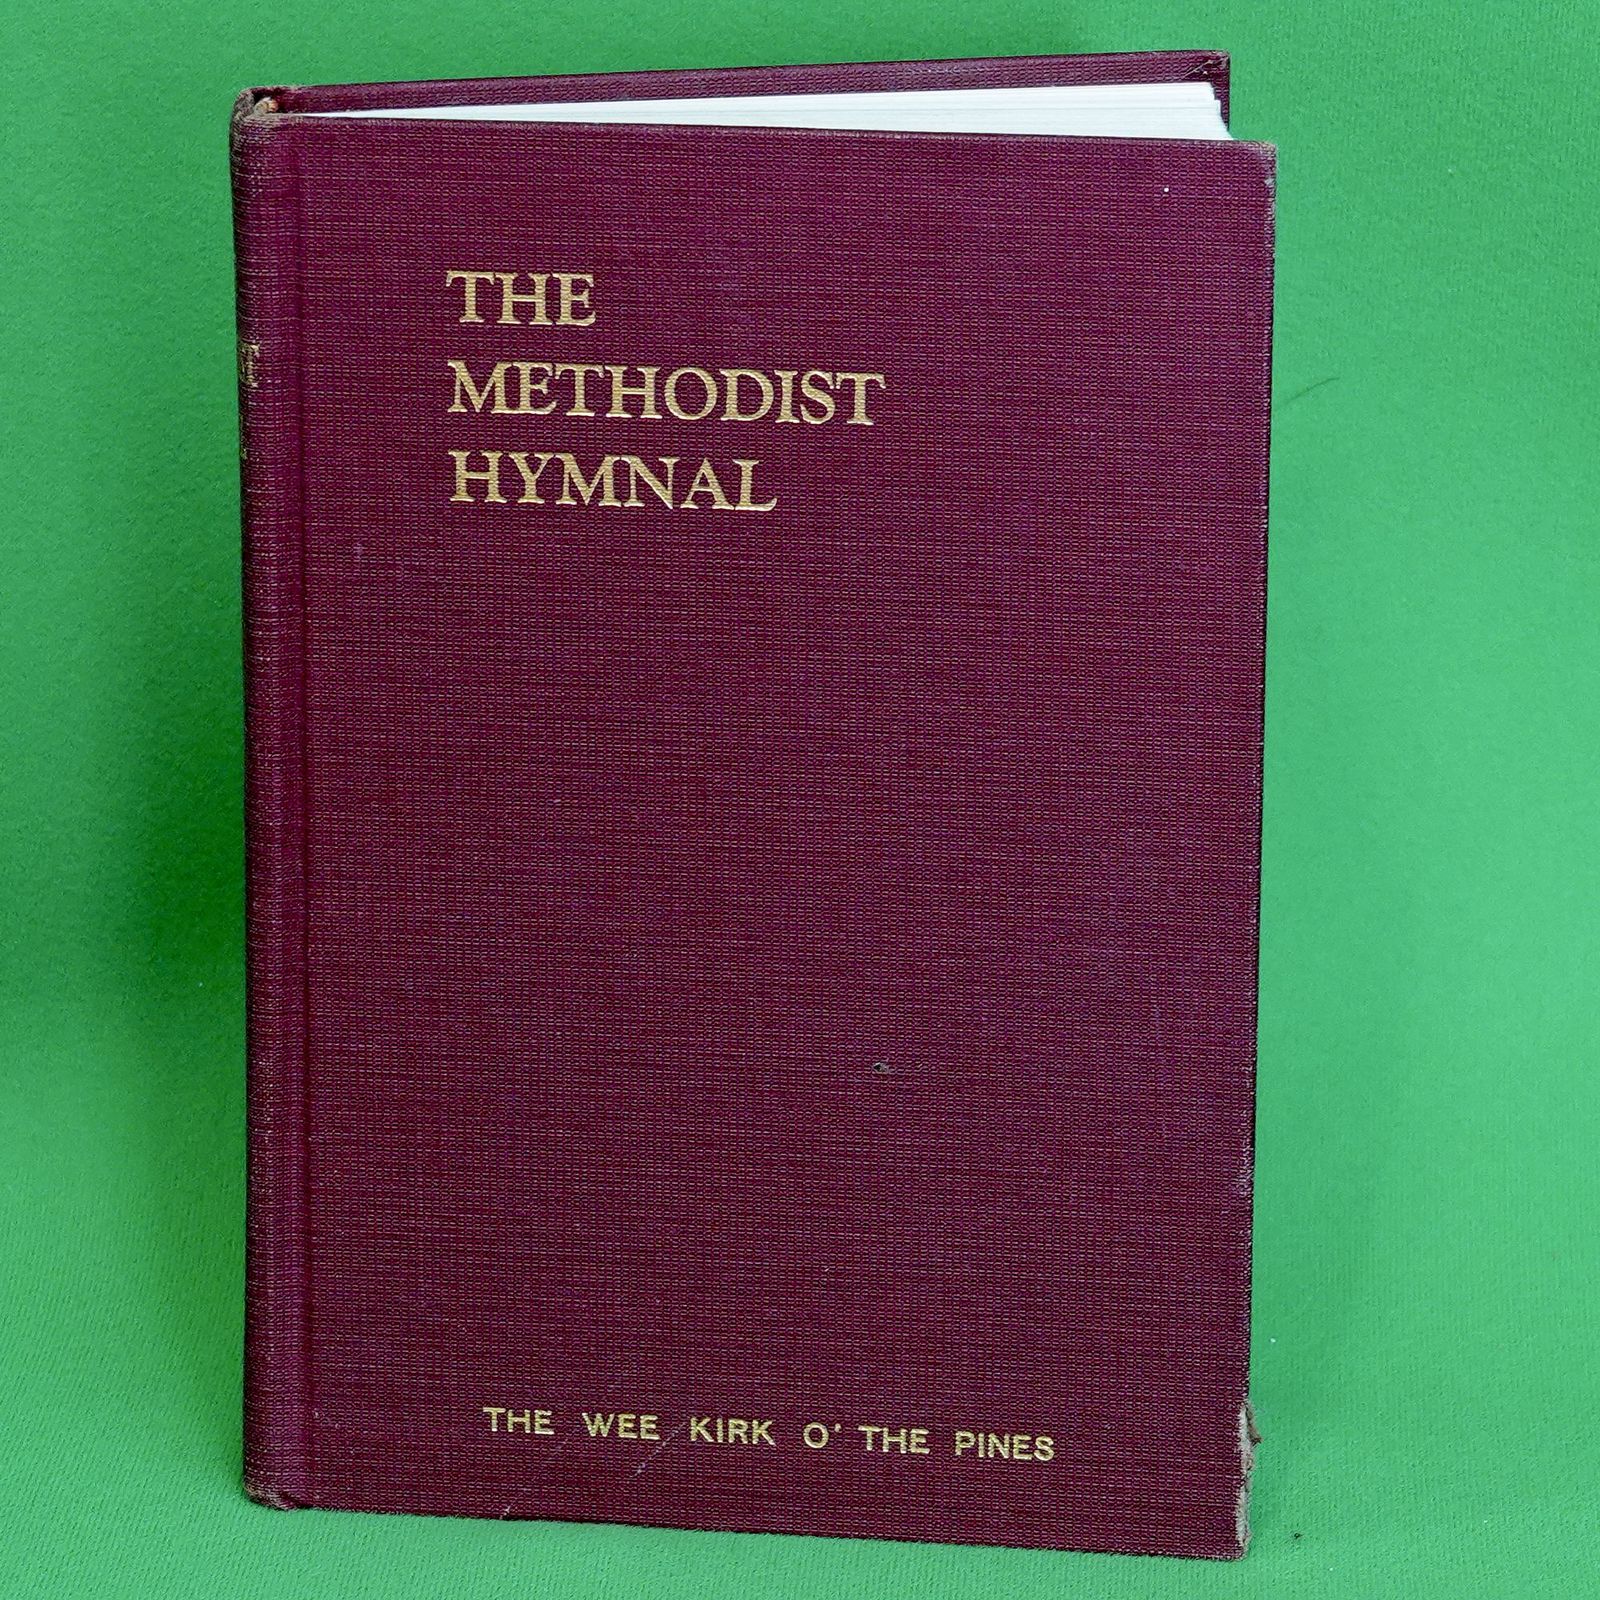 1939 Book, The Methodist Hymnal, Official Hymnal Of The Methodist